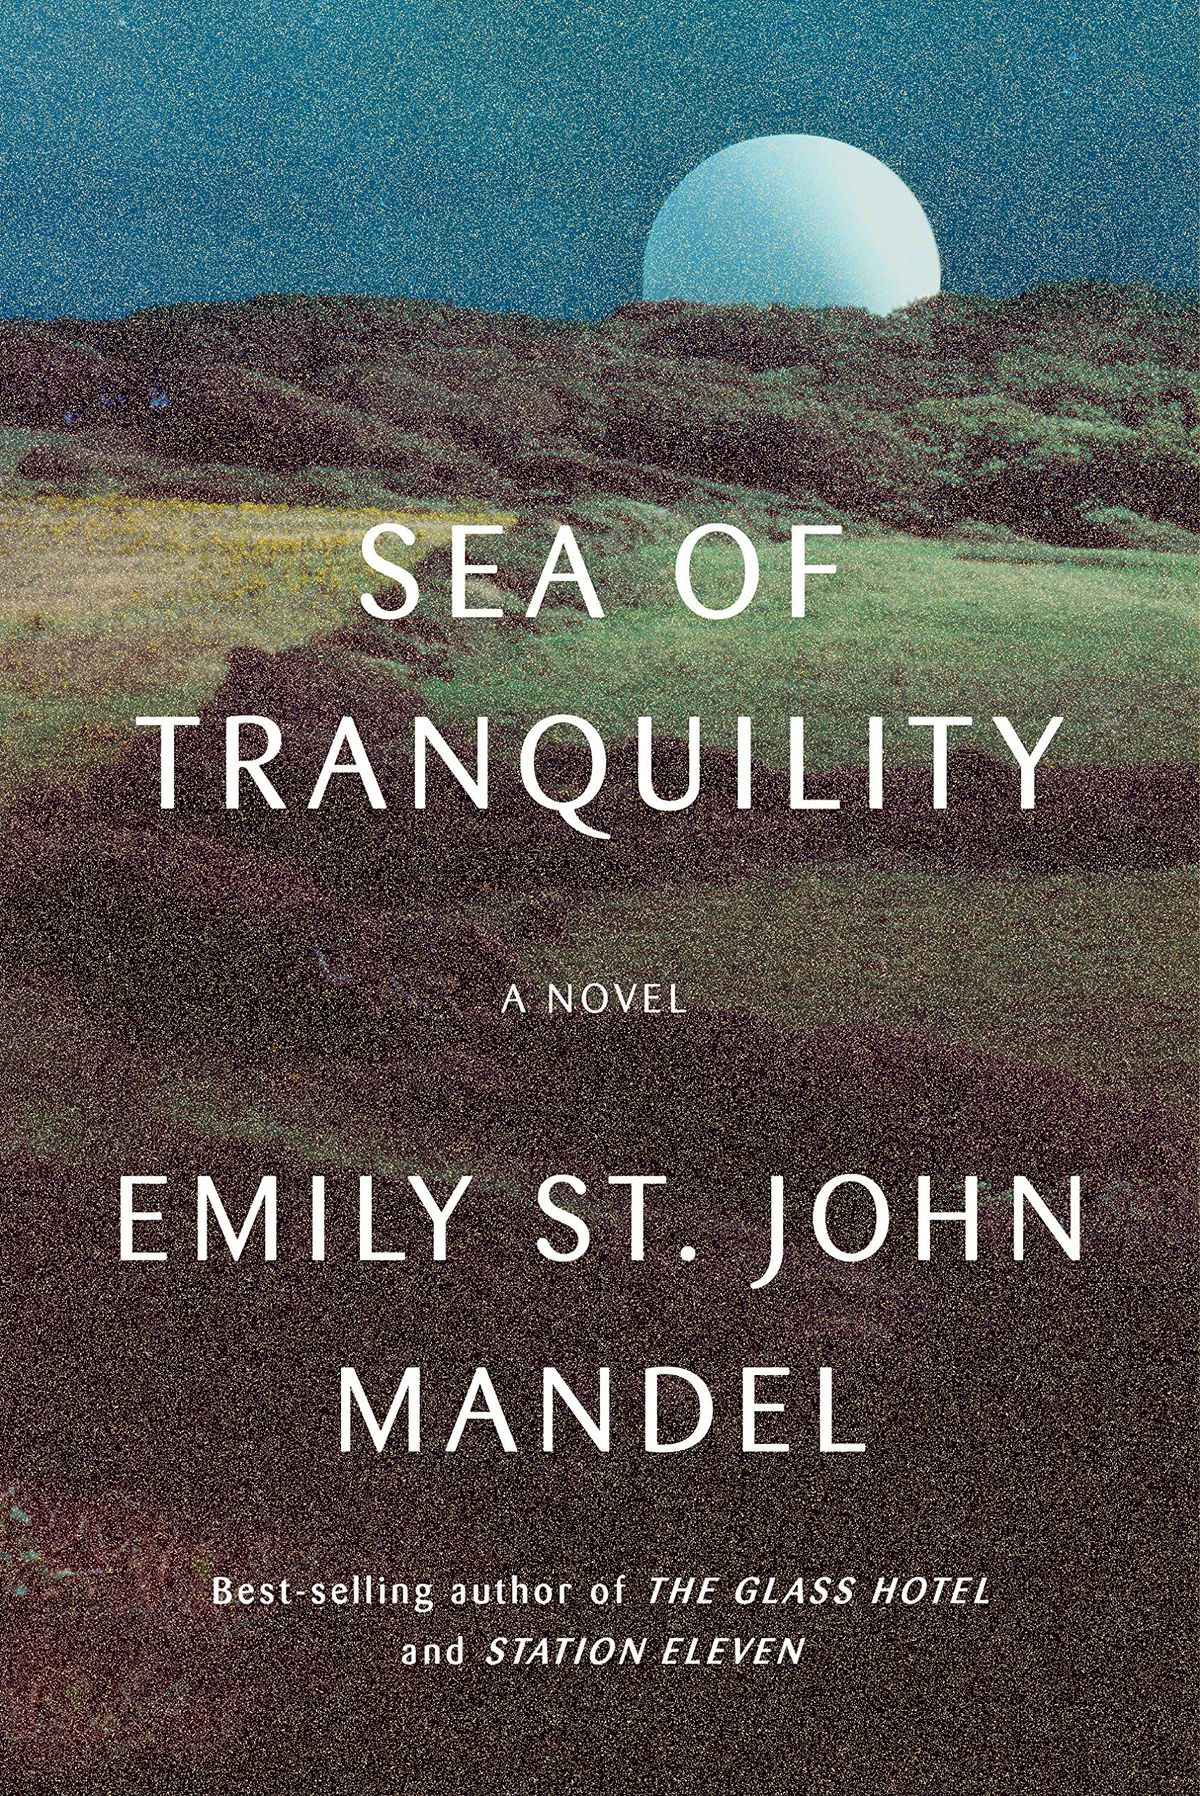 The cover for Sea of Tranquility showing a moon behind the horizon